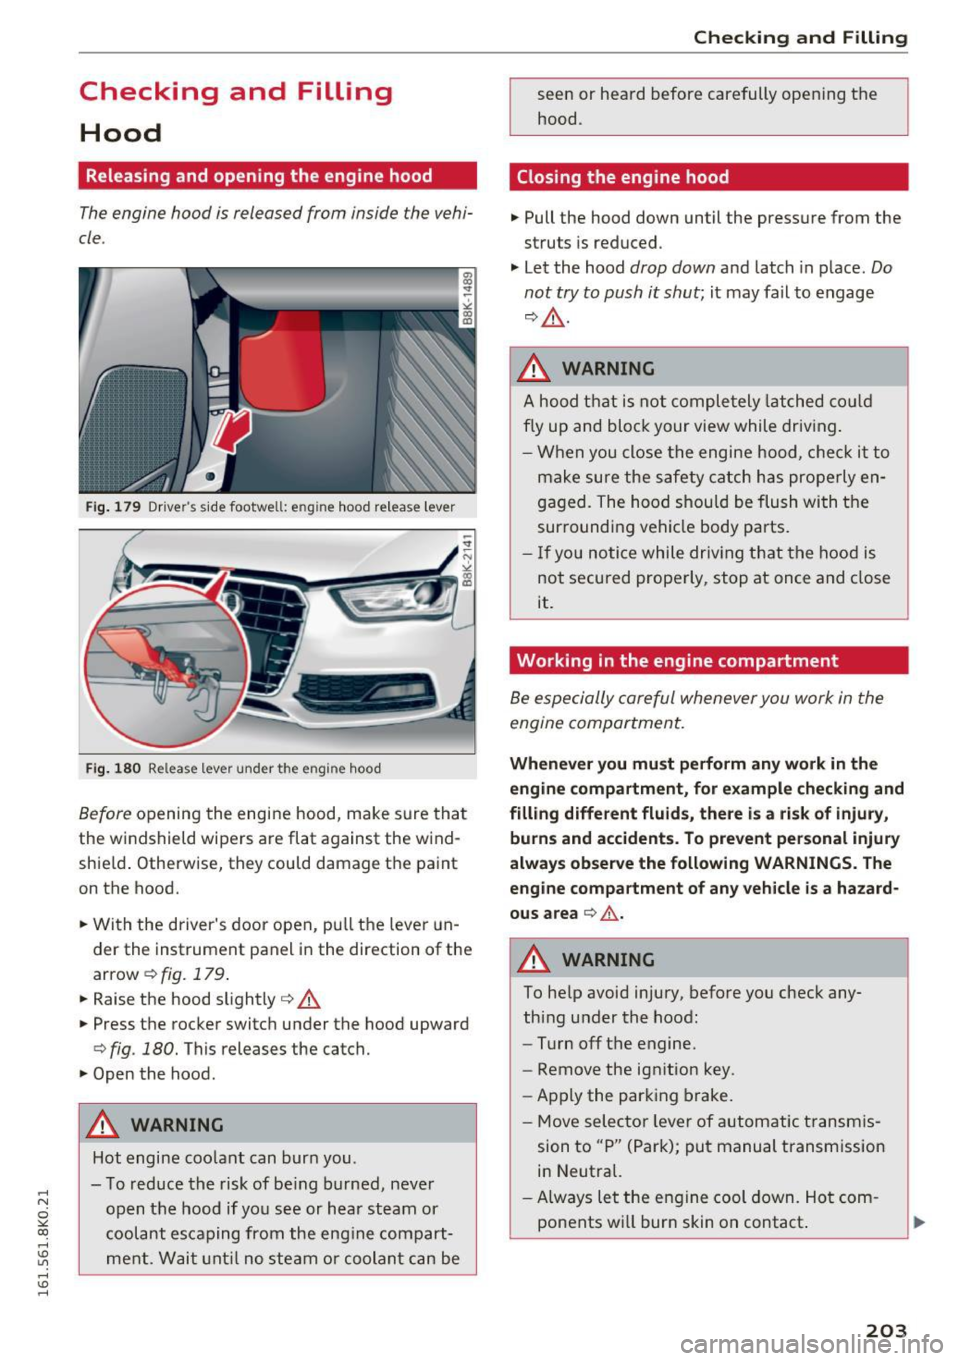 AUDI A4 2016  Owners Manual ,...., 
N 
0 
"" CX) ,...., 
I.Cl U"I ,...., 
I.Cl ,...., 
Checking  and  Filling Hood 
Releasing  and  opening  the  engine  hood 
The  engine  hood  is released  from  inside  the  vehi­
cle. 
Fig